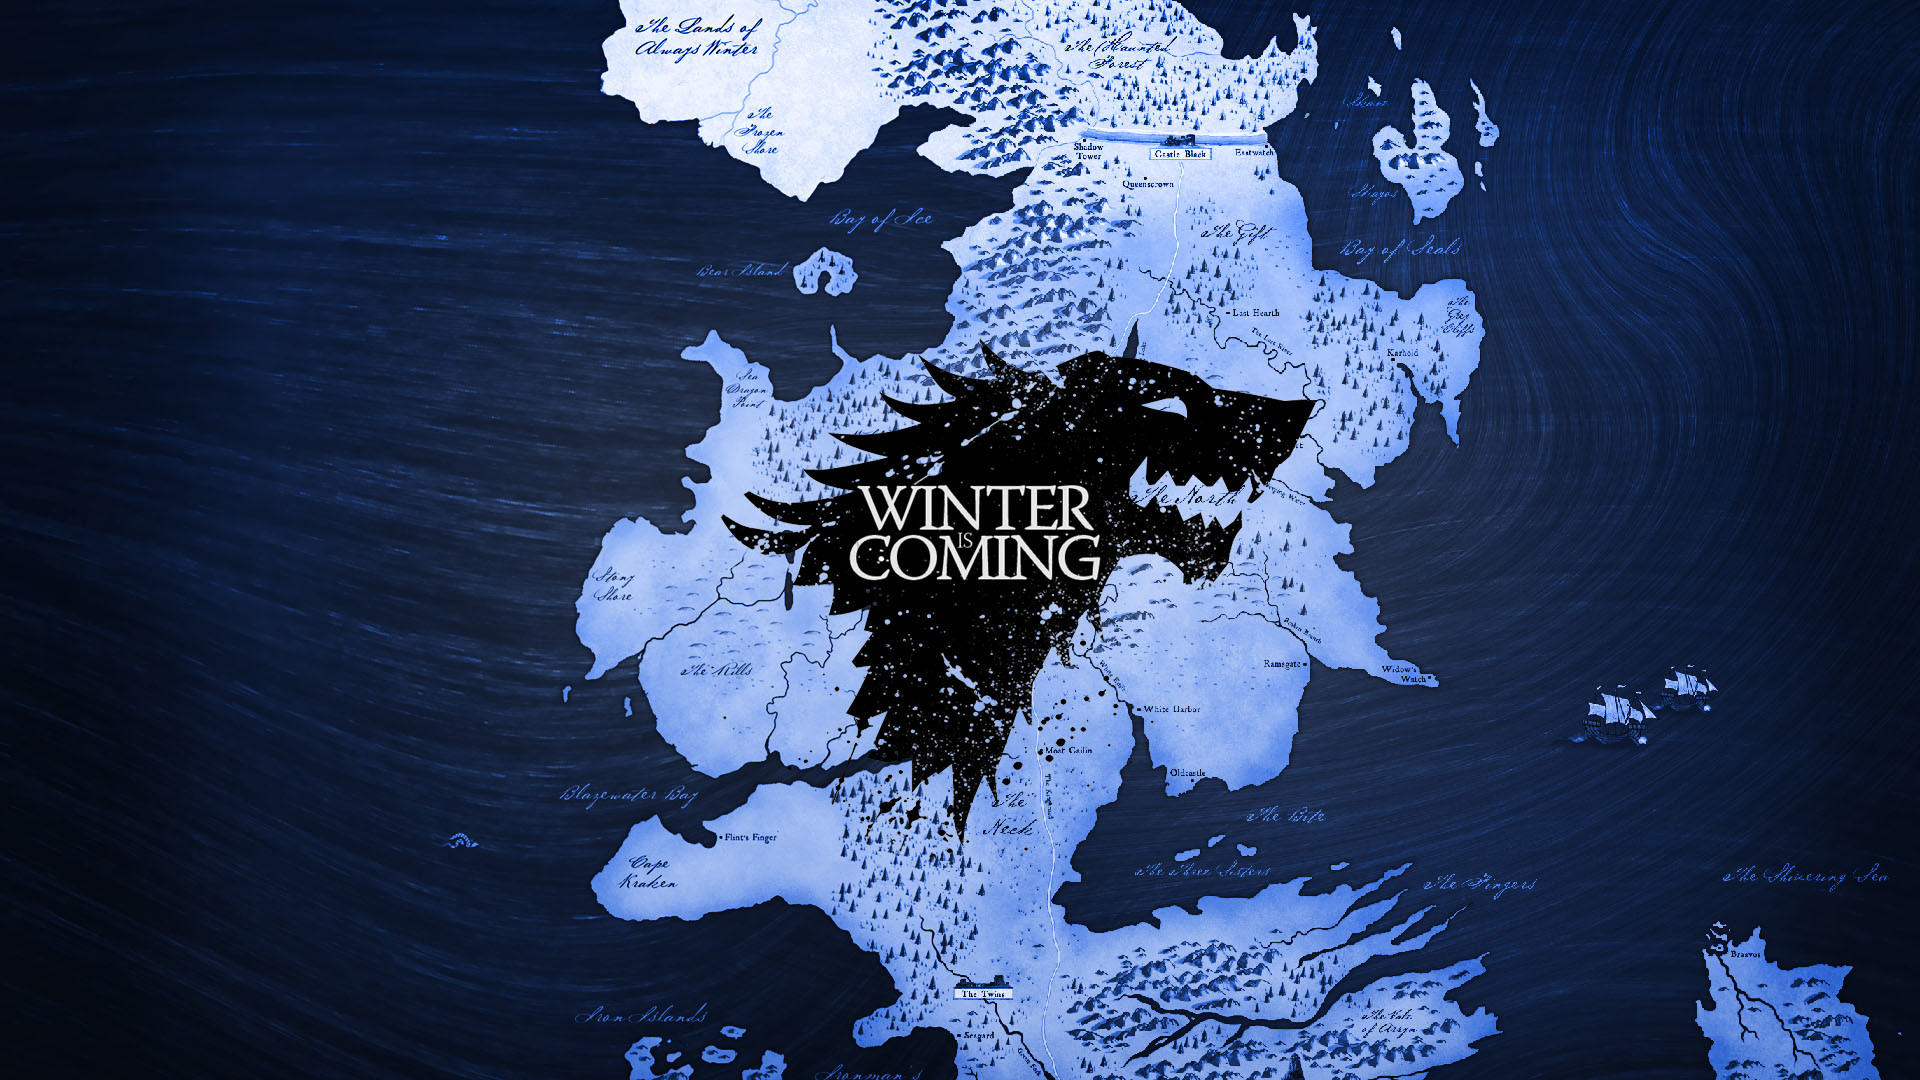 1920x1080 Game Of Thrones Wallpaper Winter Is Coming HD Image Wallpaper